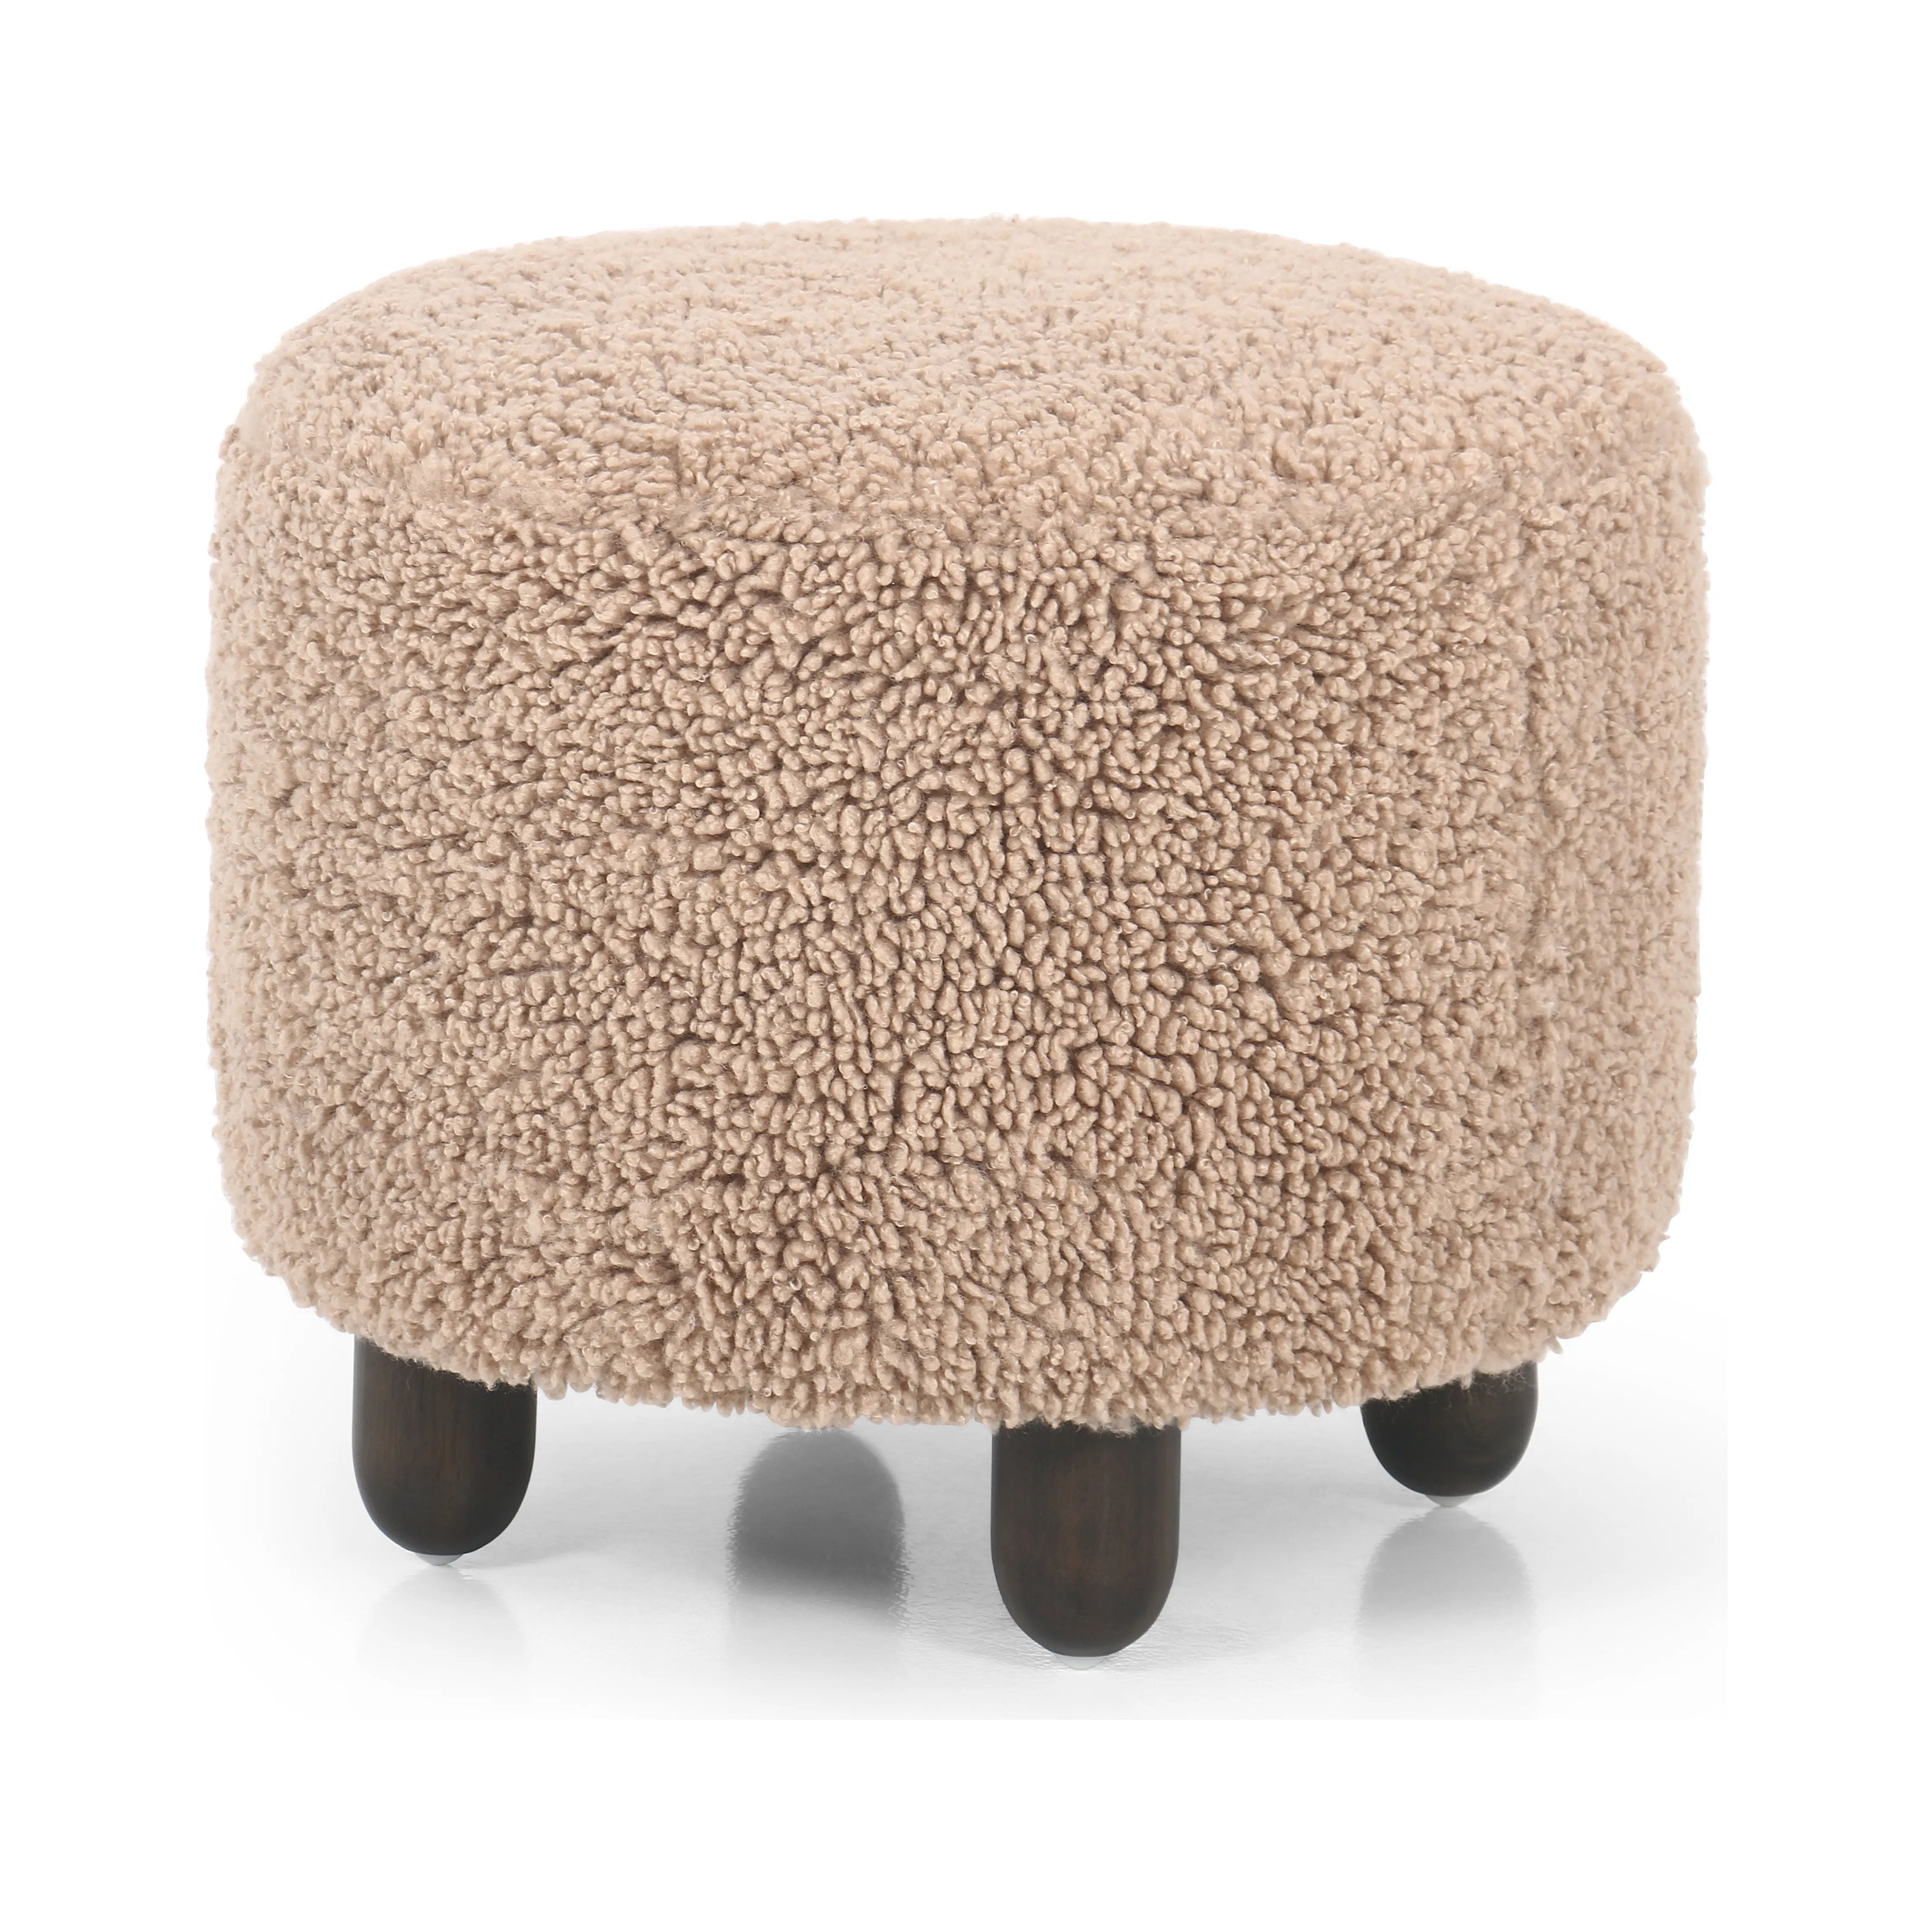 Place this round ottoman just about anywhere. Upholstered in a faux Mongolian shearling with a high pile fur in a toasty tan neutral hue. Burnt birch parawood legs add a touch of contrast.Collection: Kensingto Amethyst Home provides interior design, new home construction design consulting, vintage area rugs, and lighting in the Austin metro area.